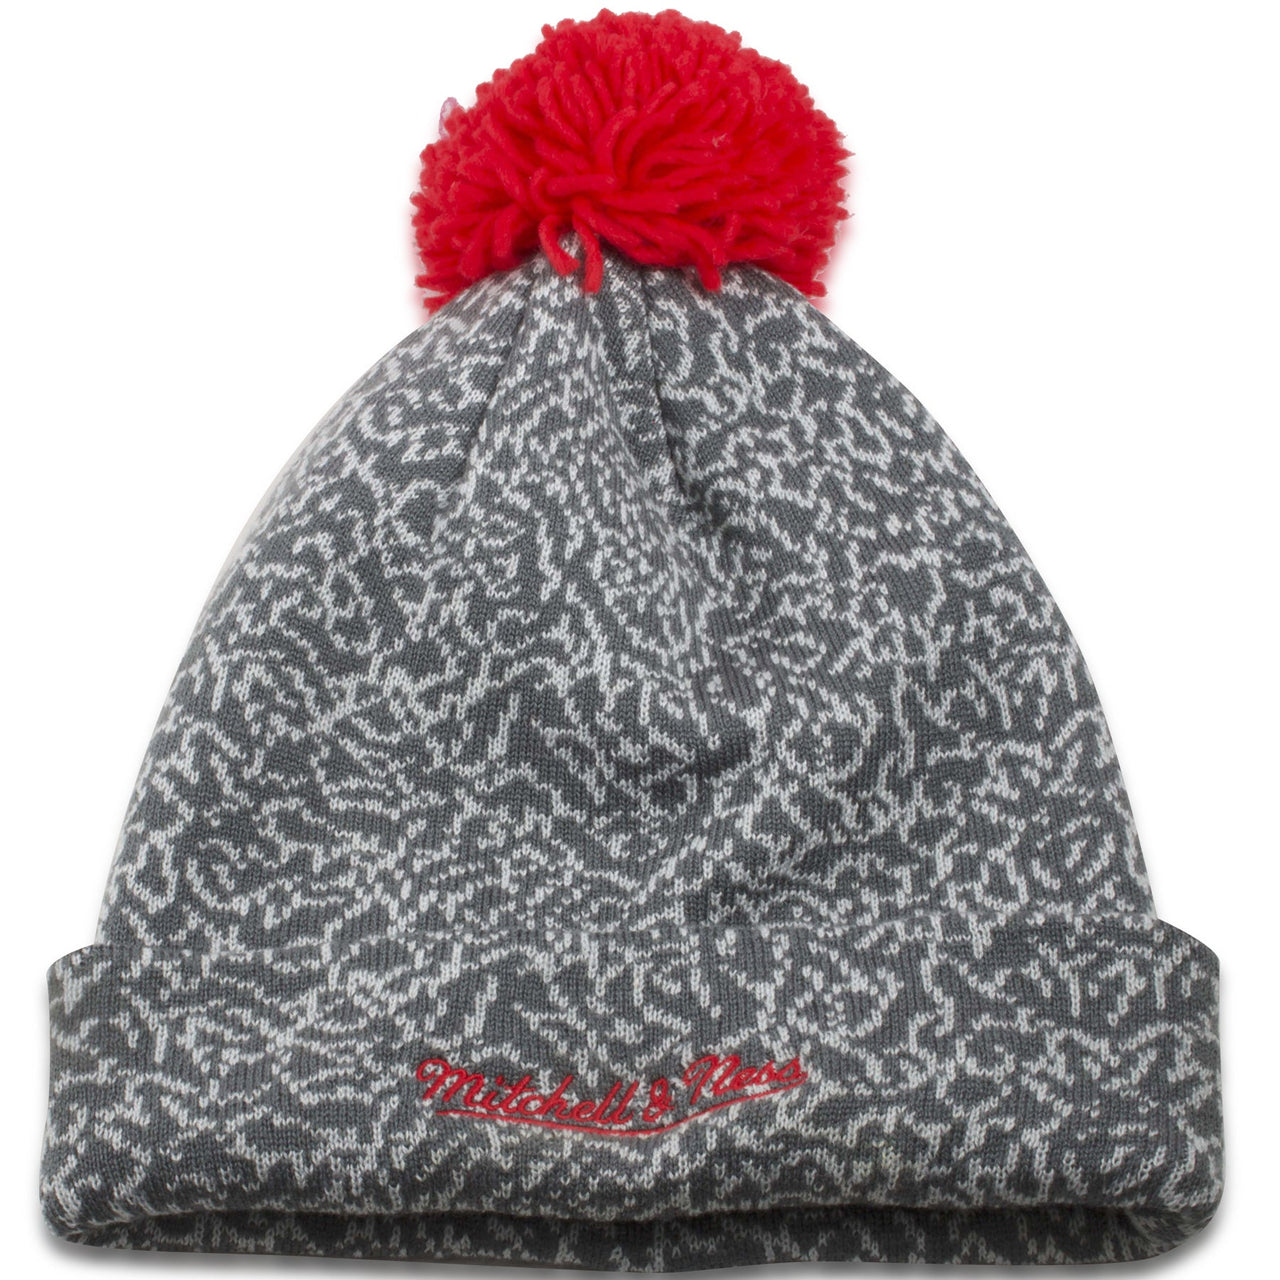 Chicago Bulls Mitchell and Ness Elephant Print Winter Knit Beanie